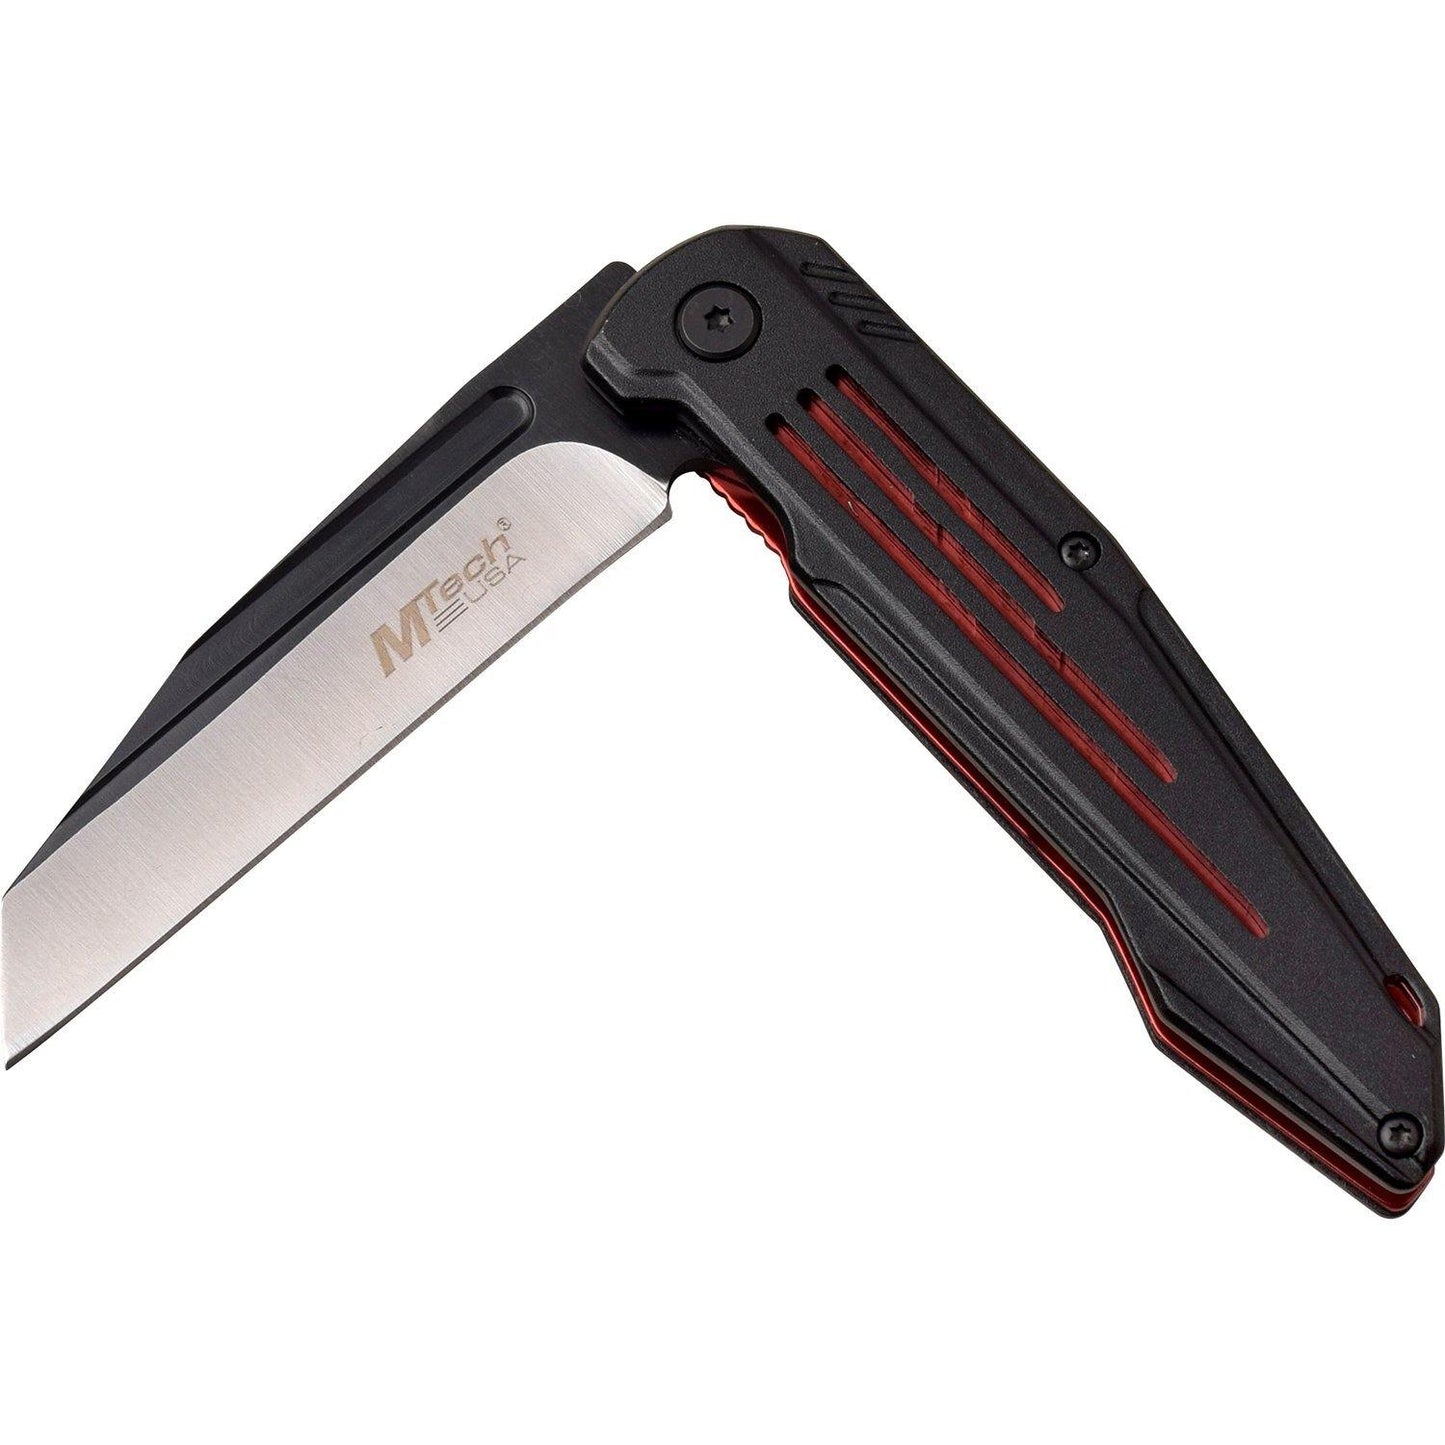 Mtech Wharncliffe Fine Edge Blade Manual Folding Knife - 8 Inches Overall #mt-1060Rd - Xhunter New Zealand